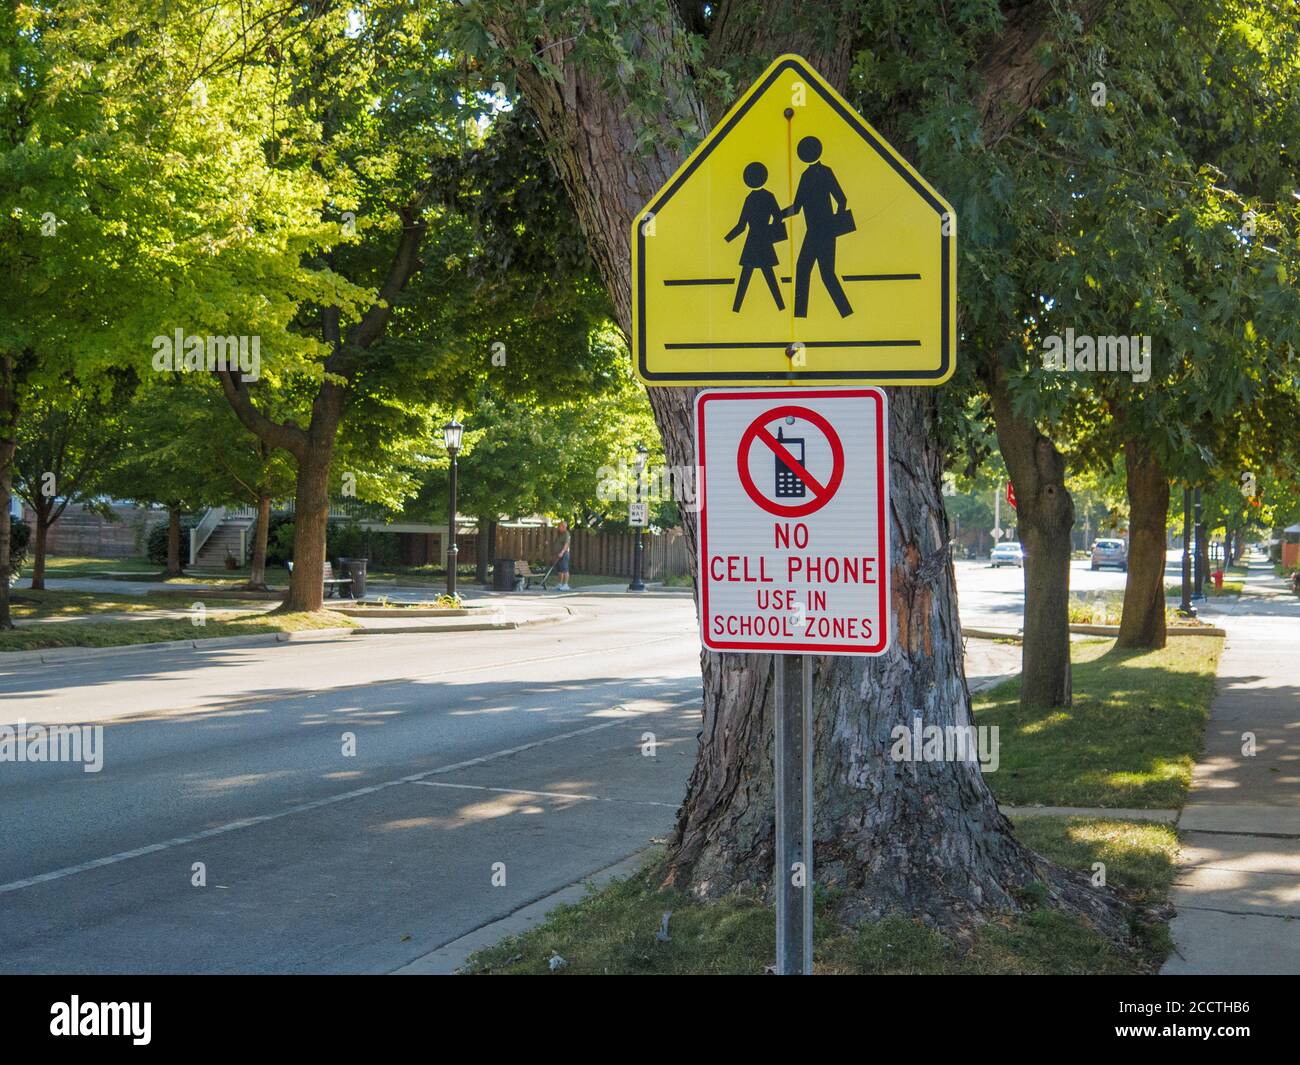 School crossing and no cell pone use in school zone road signs. Forest Park, Illinois. Stock Photo